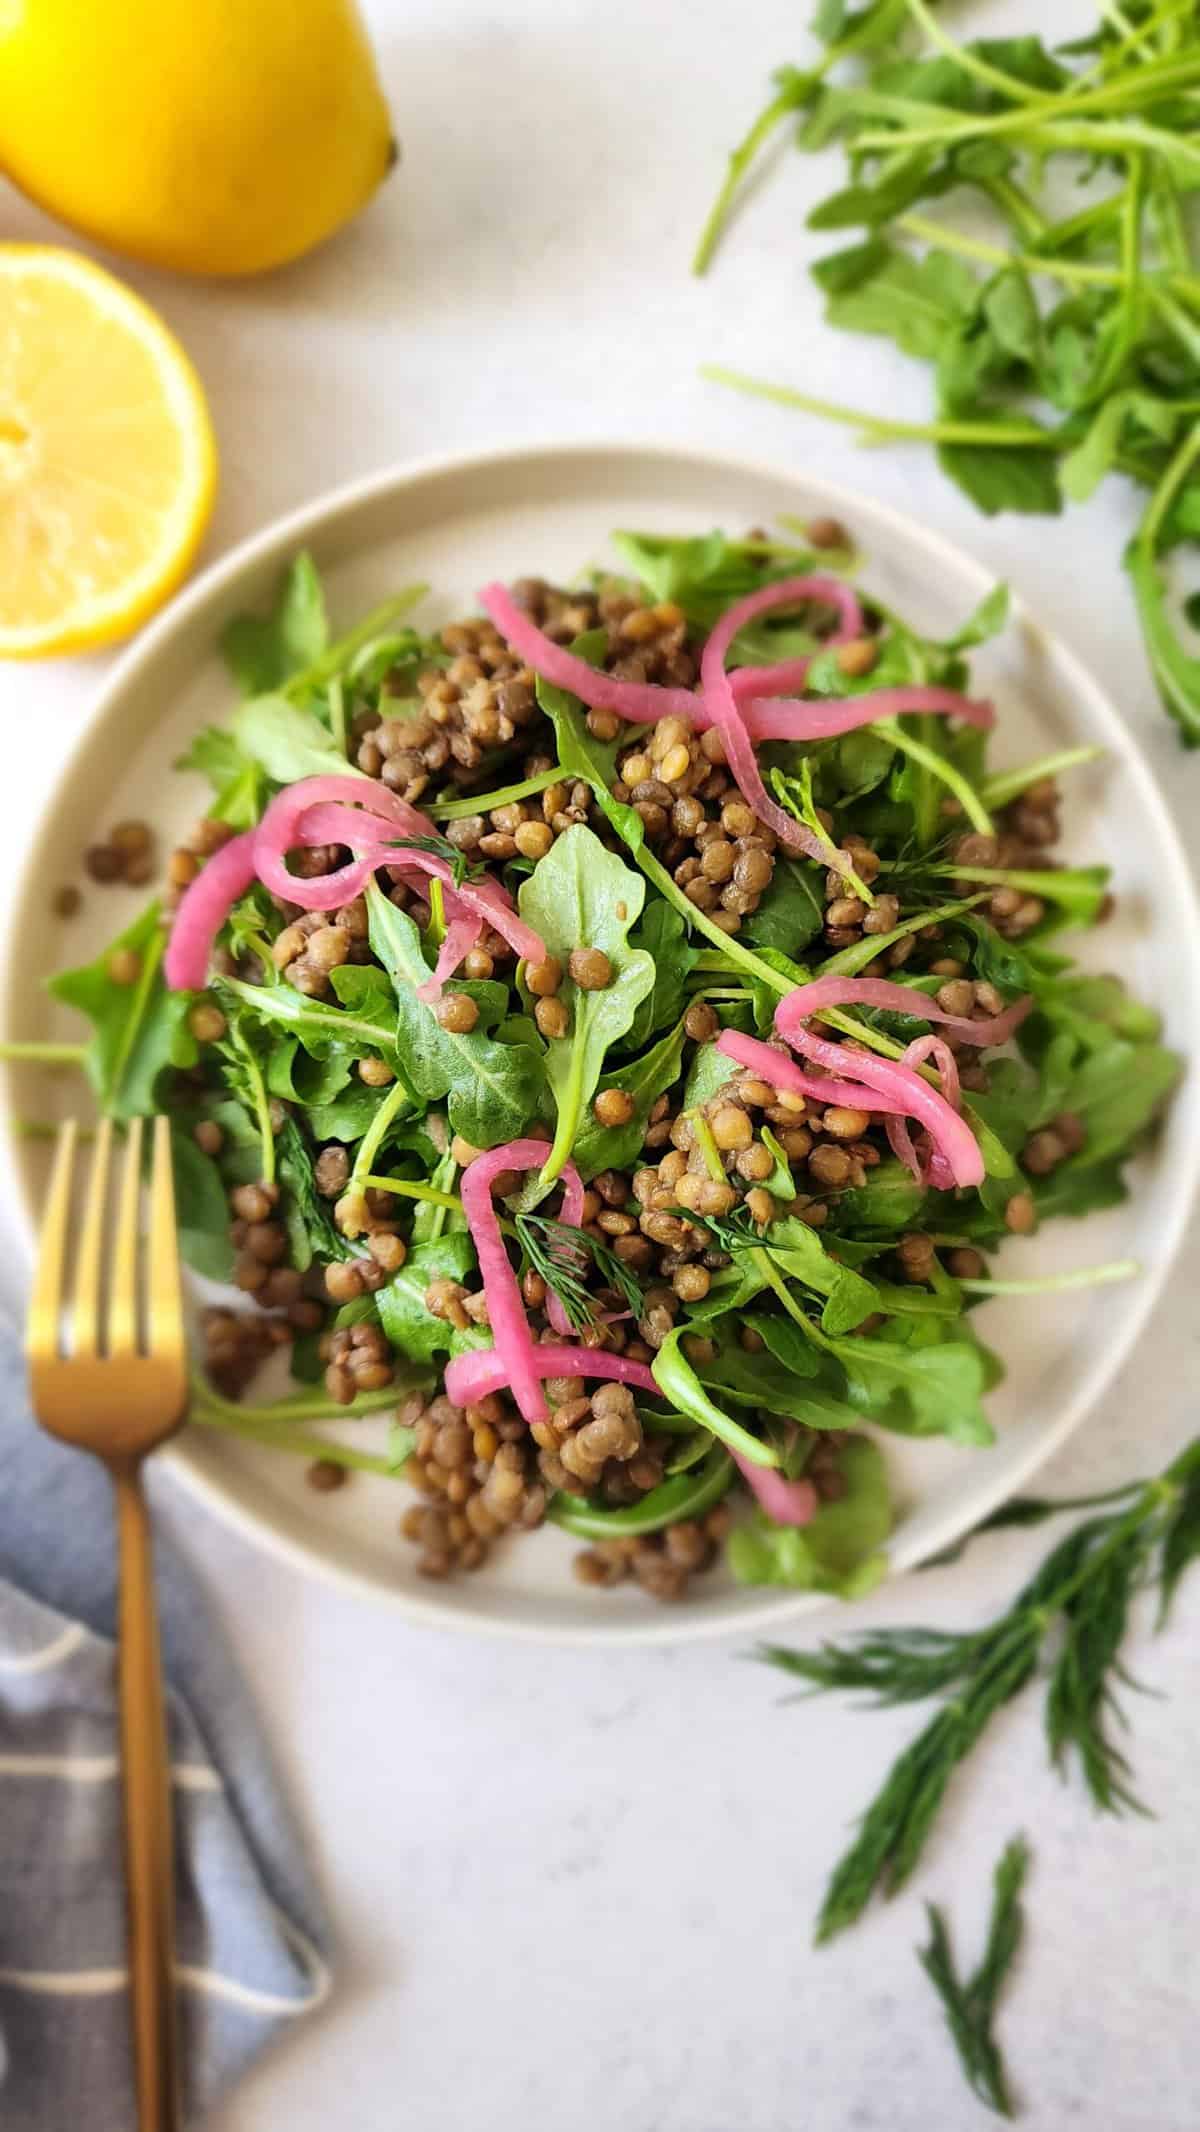 Simple Lentil salad mixed with arugula and pickled red onion on a plate